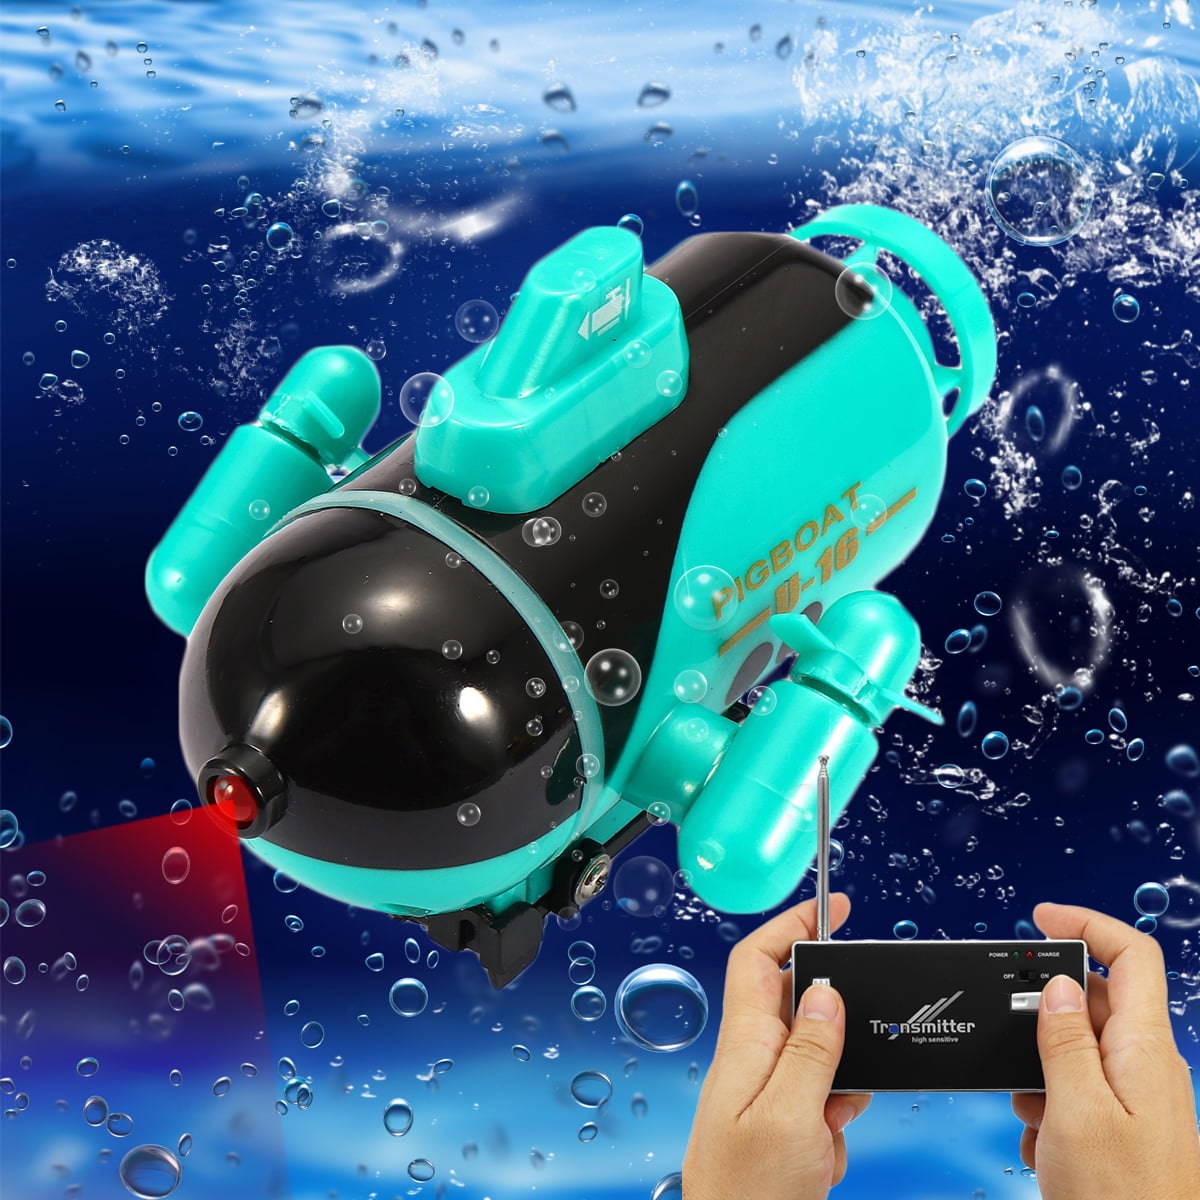 Create Toys Mini RC Submarine Boat RC Toy Remote Control Waterproof Diving N2B6 